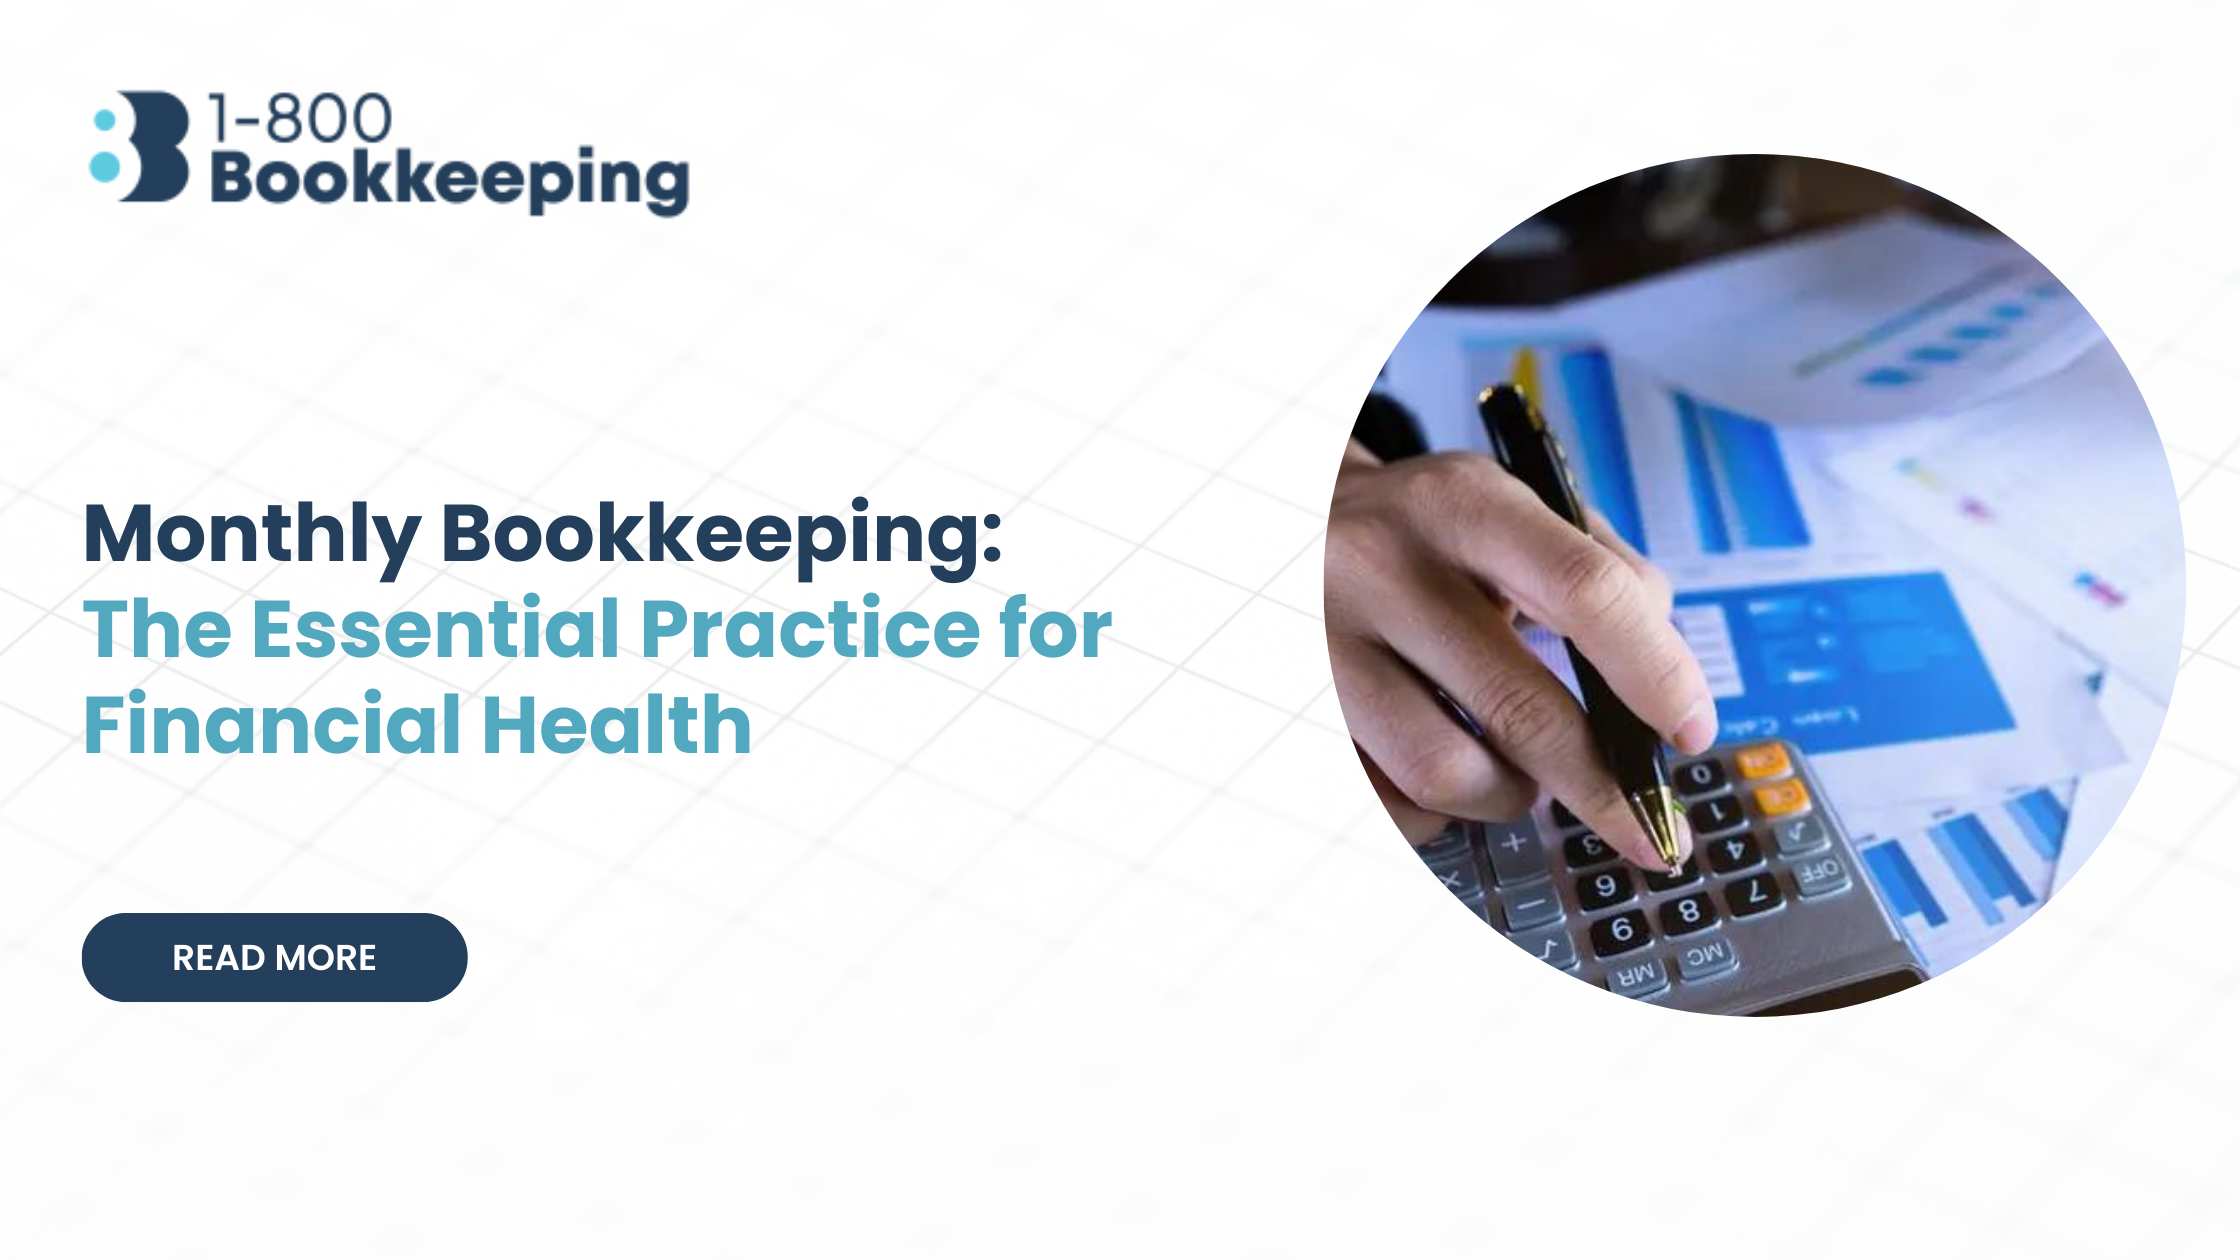 Monthly Bookkeeping: The Essential Practice for Financial Health